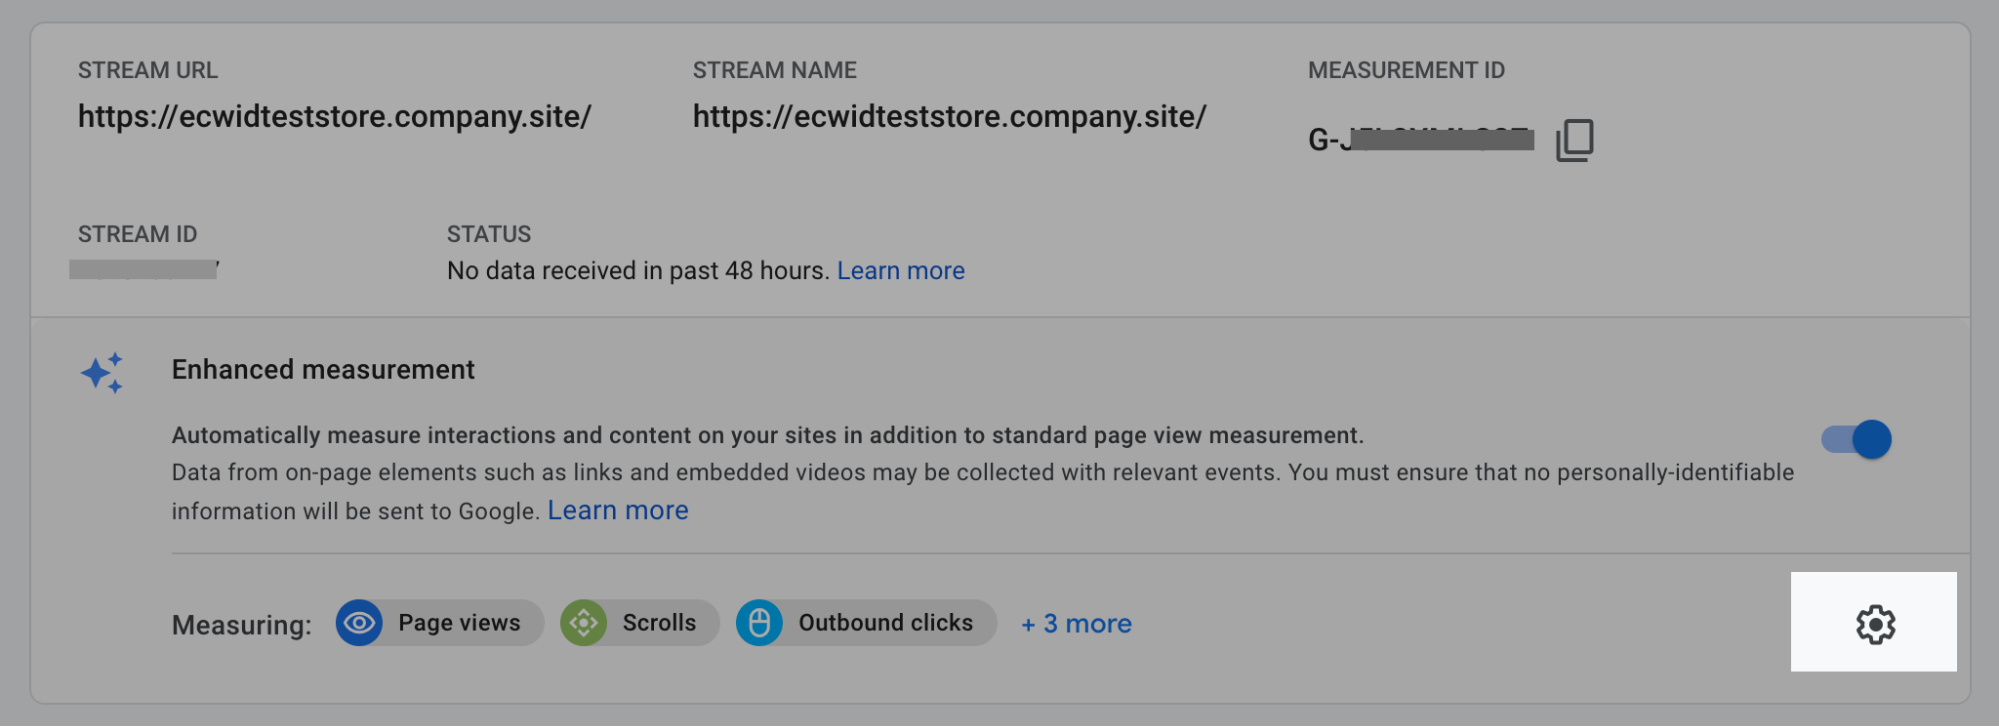 Enabling Google Analytics For Your Ecwid Store Ecwid Help Center